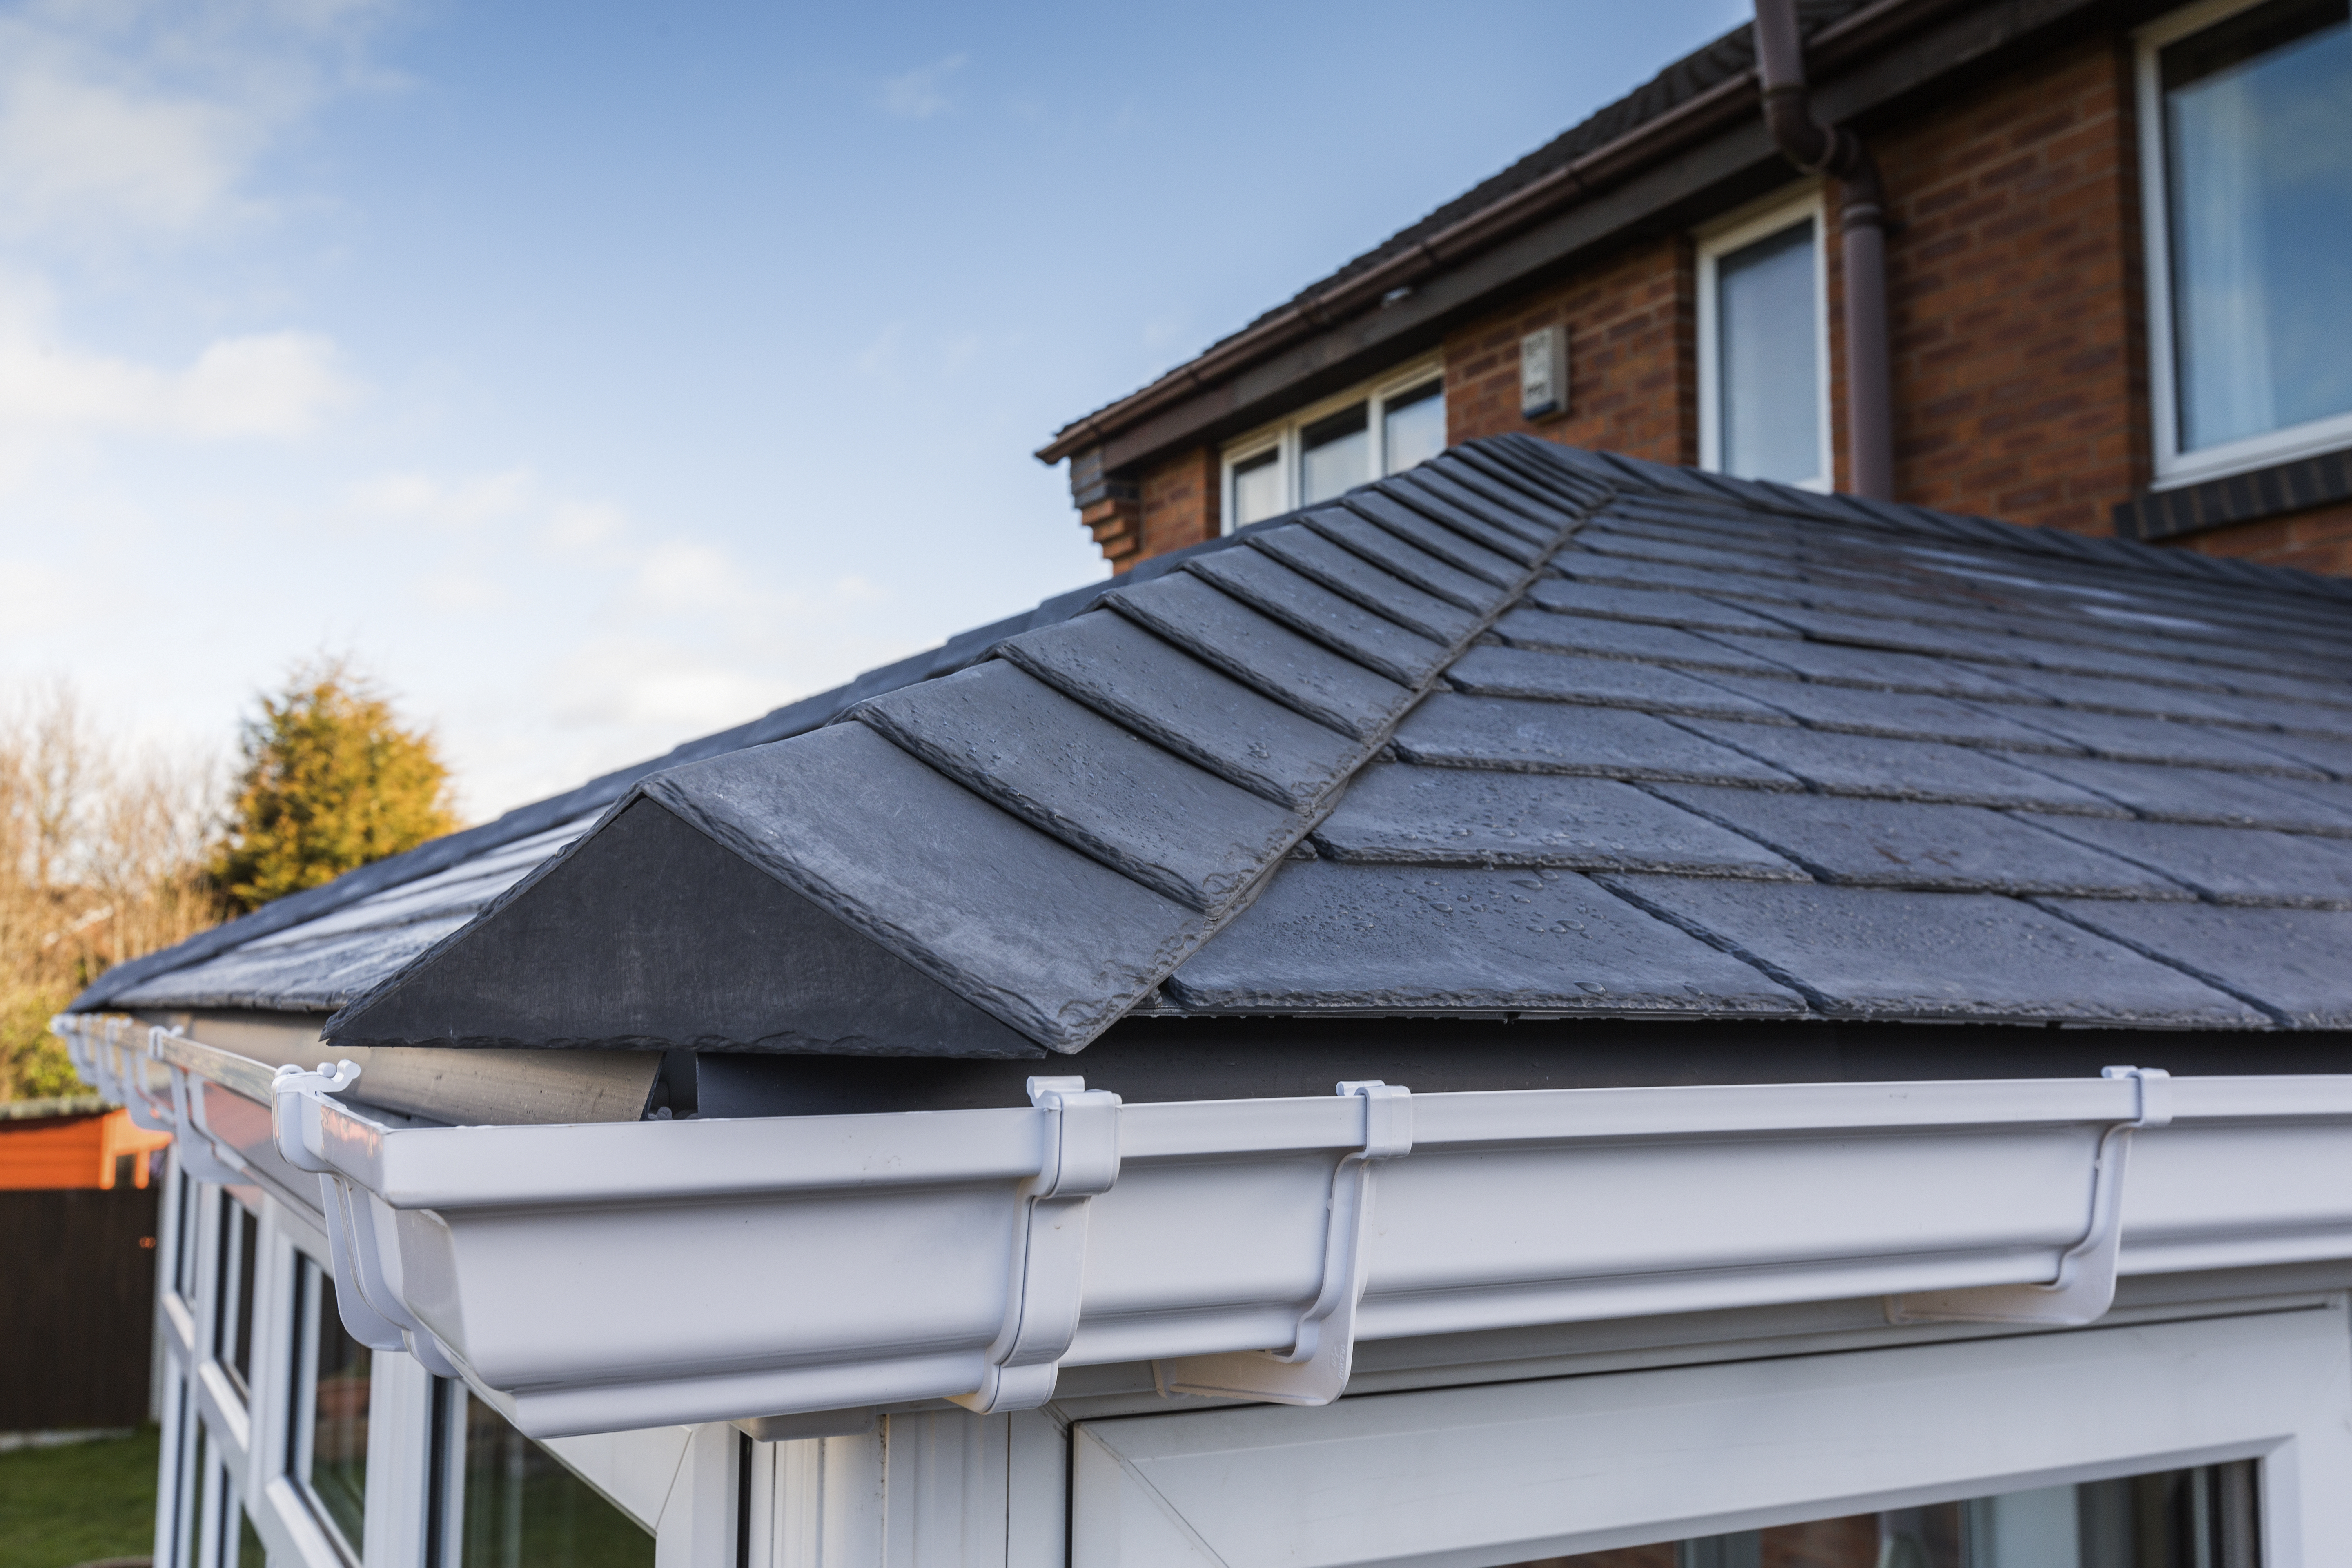 Insulated Warm Roofs Timeline Image